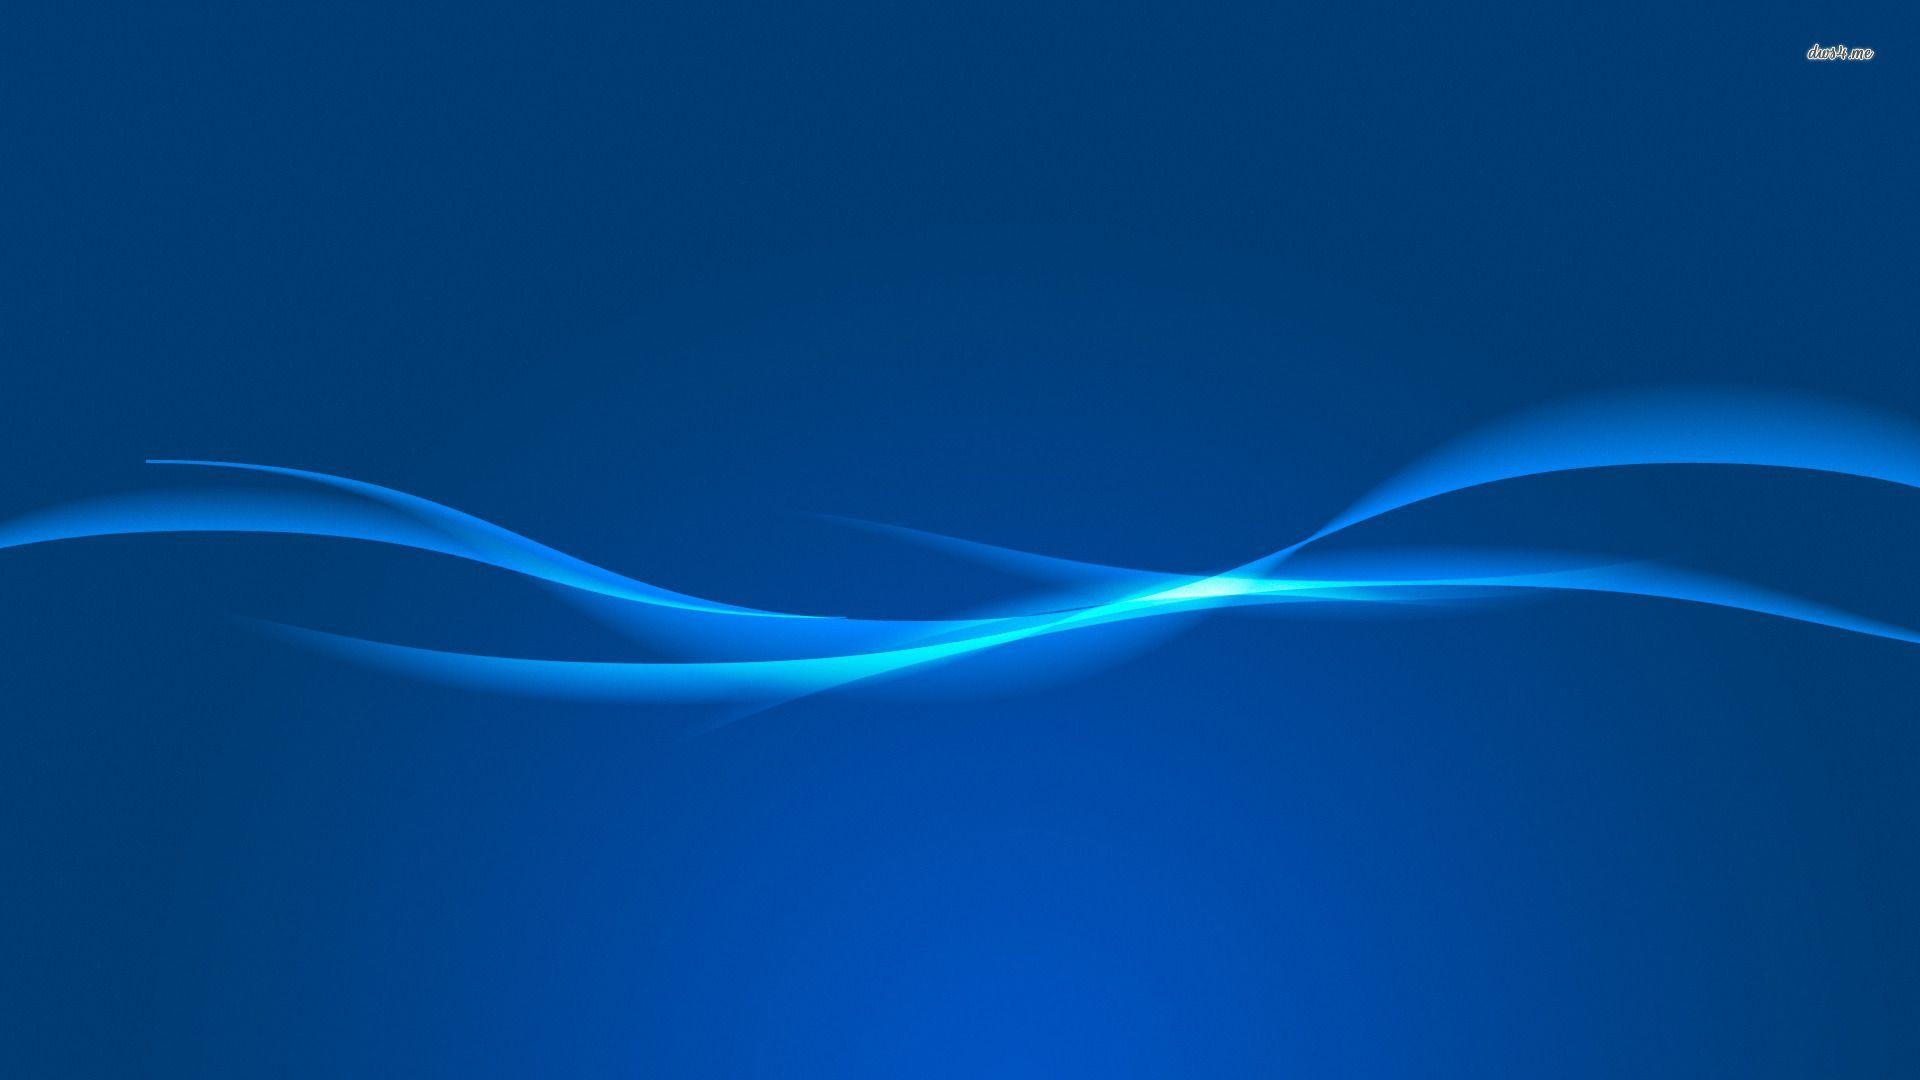 1920x1080 Blue Waves wallpaper - Abstract wallpapers - #